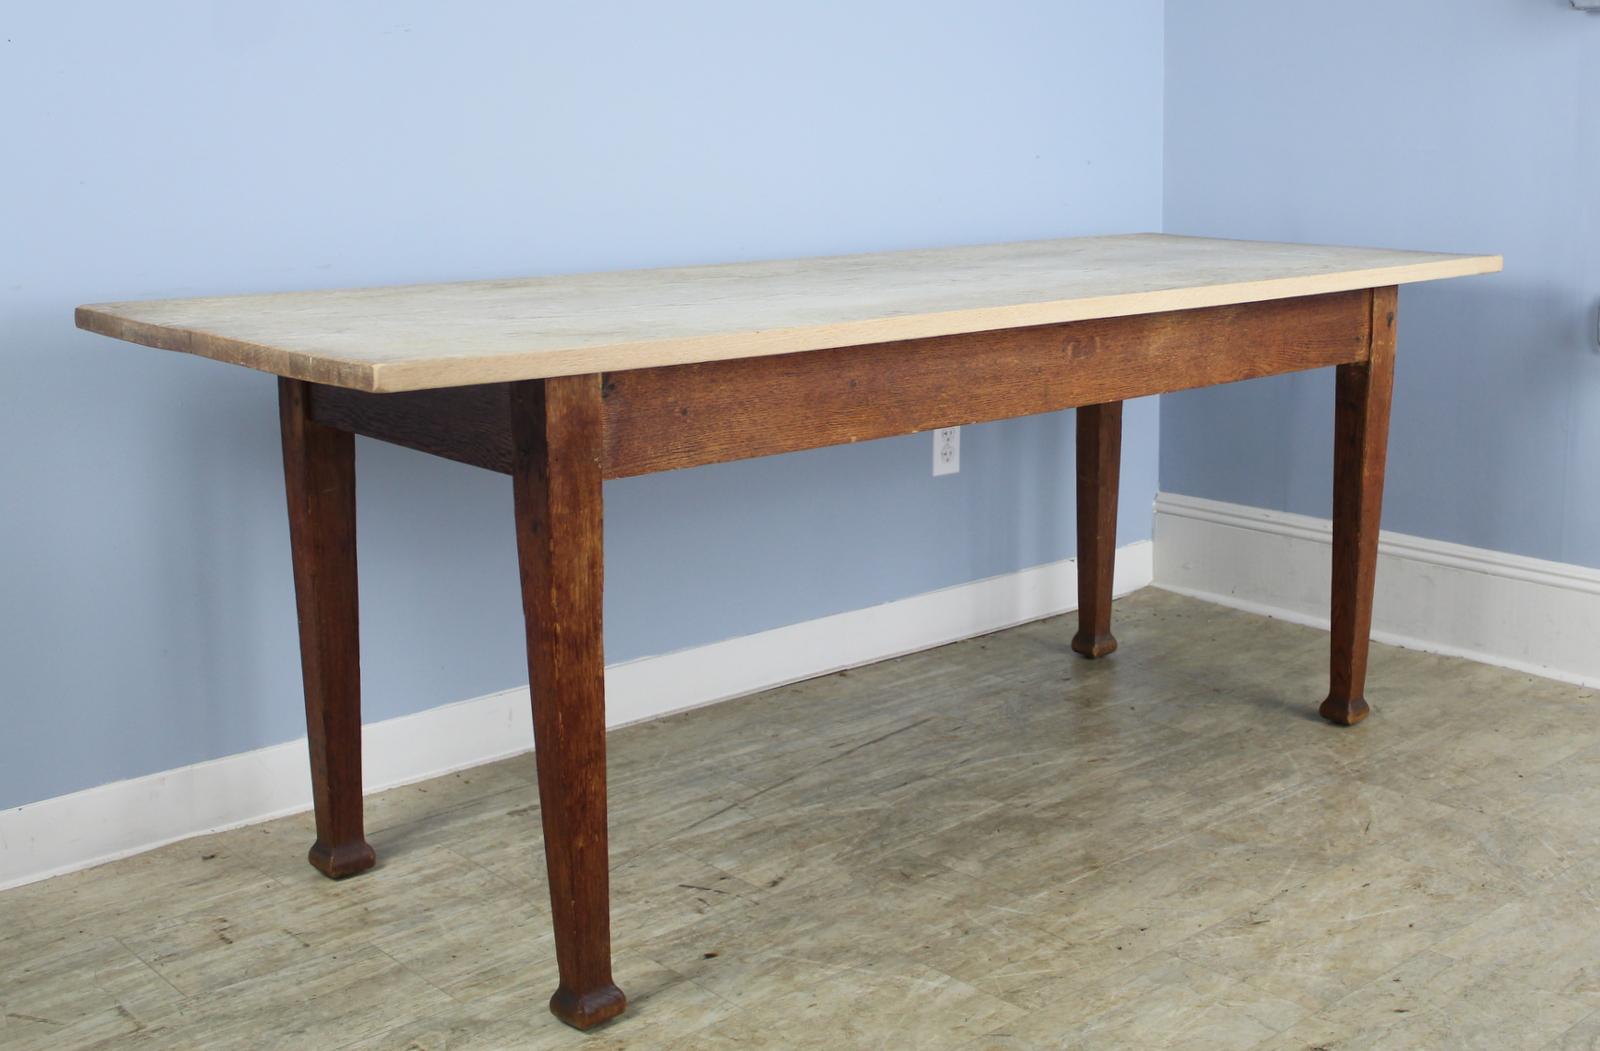 A simple farm table with a clean bleached top. Stylized feet and interesting color contrast between the top and the base, both oak. 24.5 inch apron height is good for knees and there are 57.5 inches between the legs on the long side.